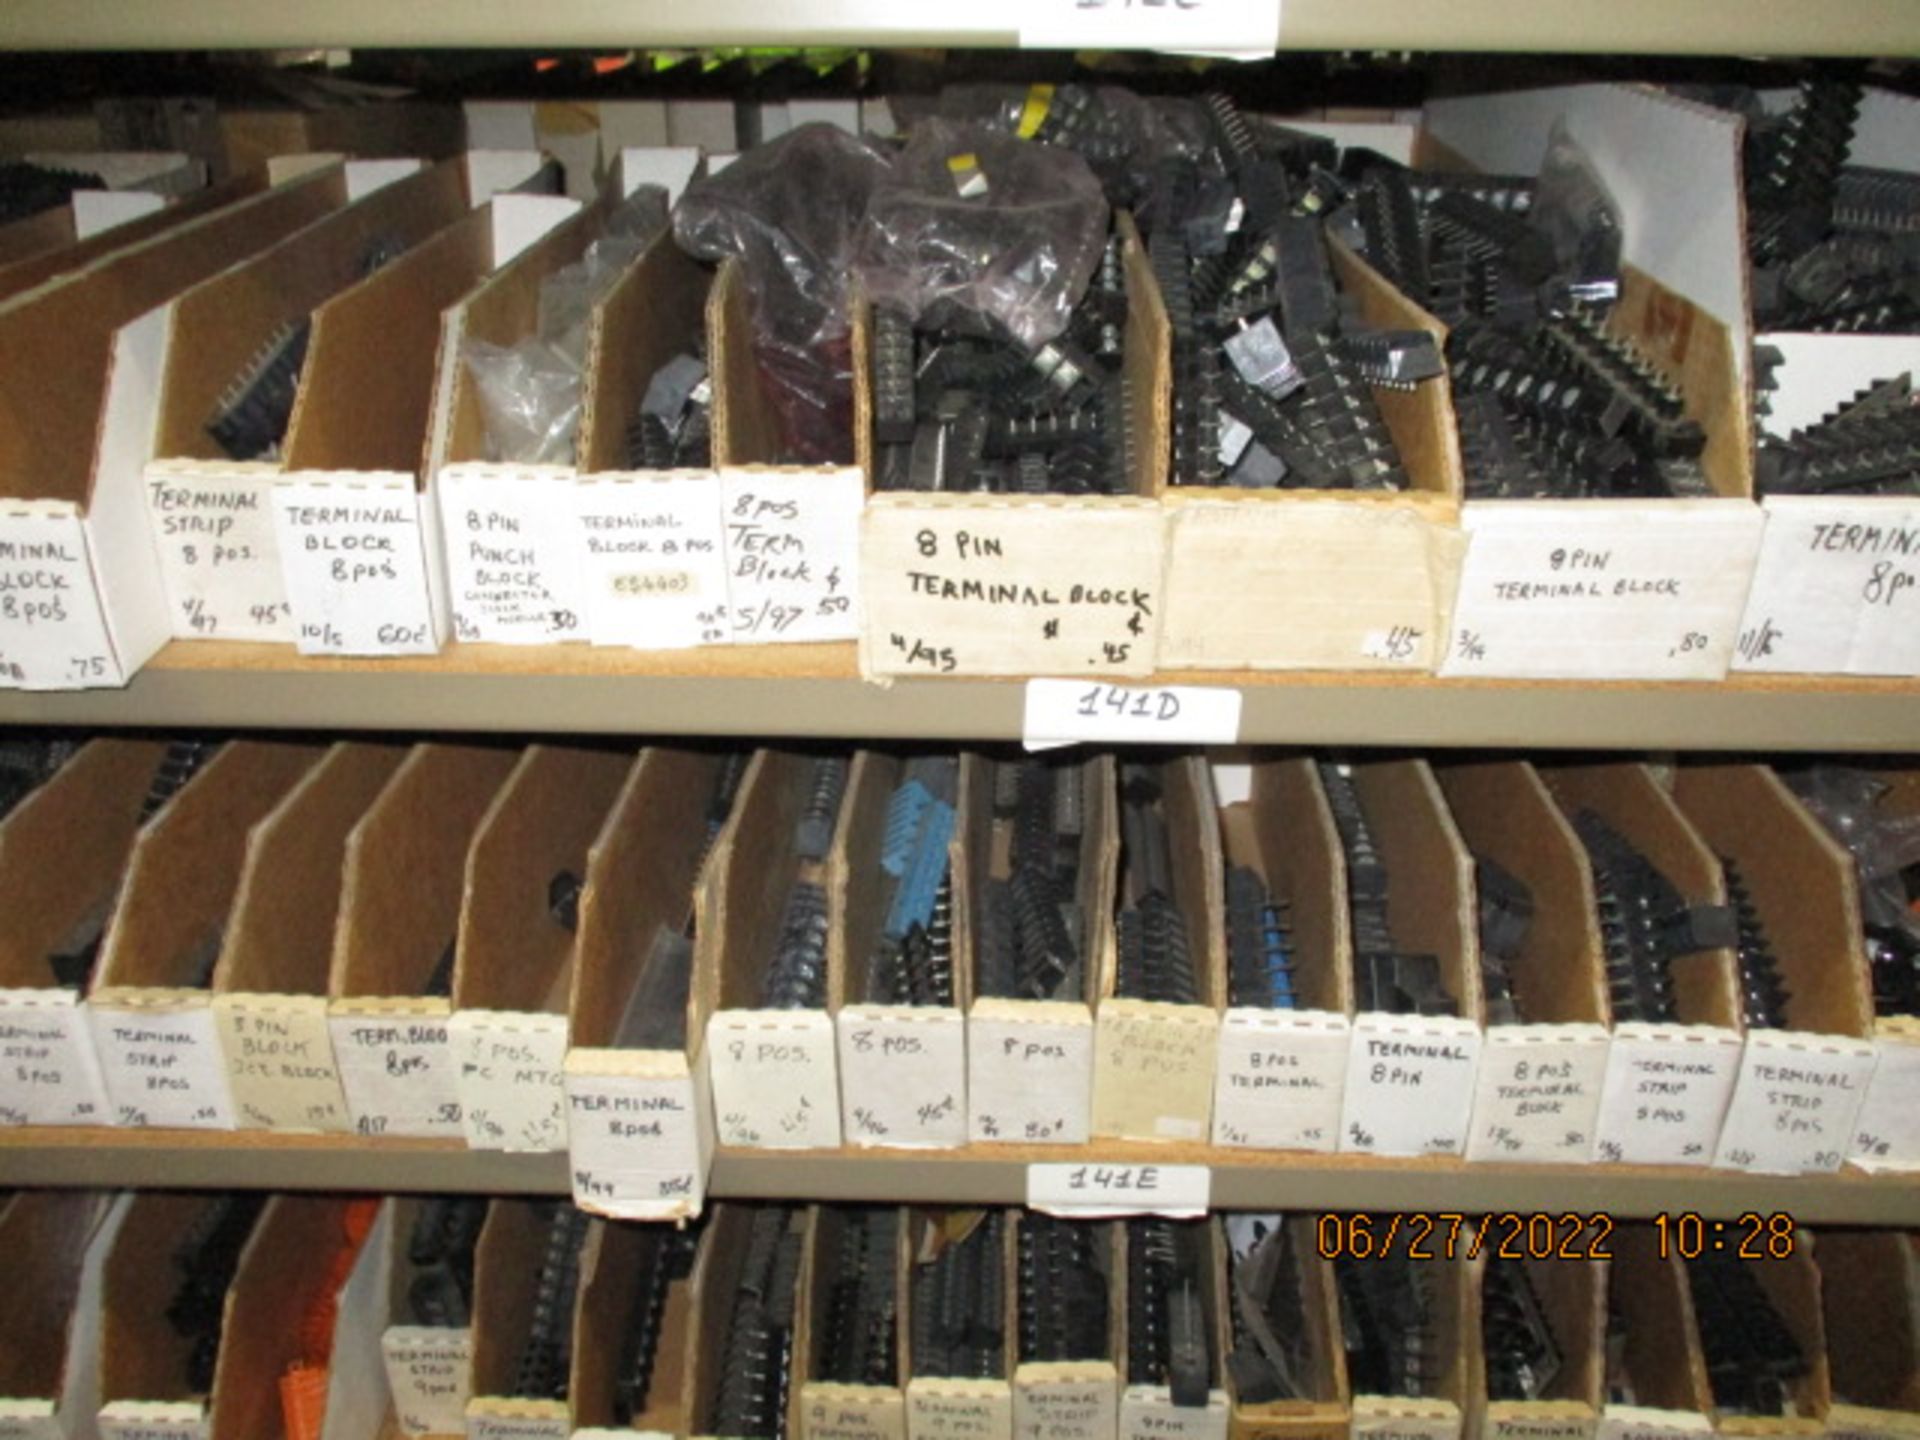 CONTENTS OF SHELVING UNIT CONSISTING OF INSULATORS, COVERS, 2-10 PIN CONNECTORS - Image 3 of 5